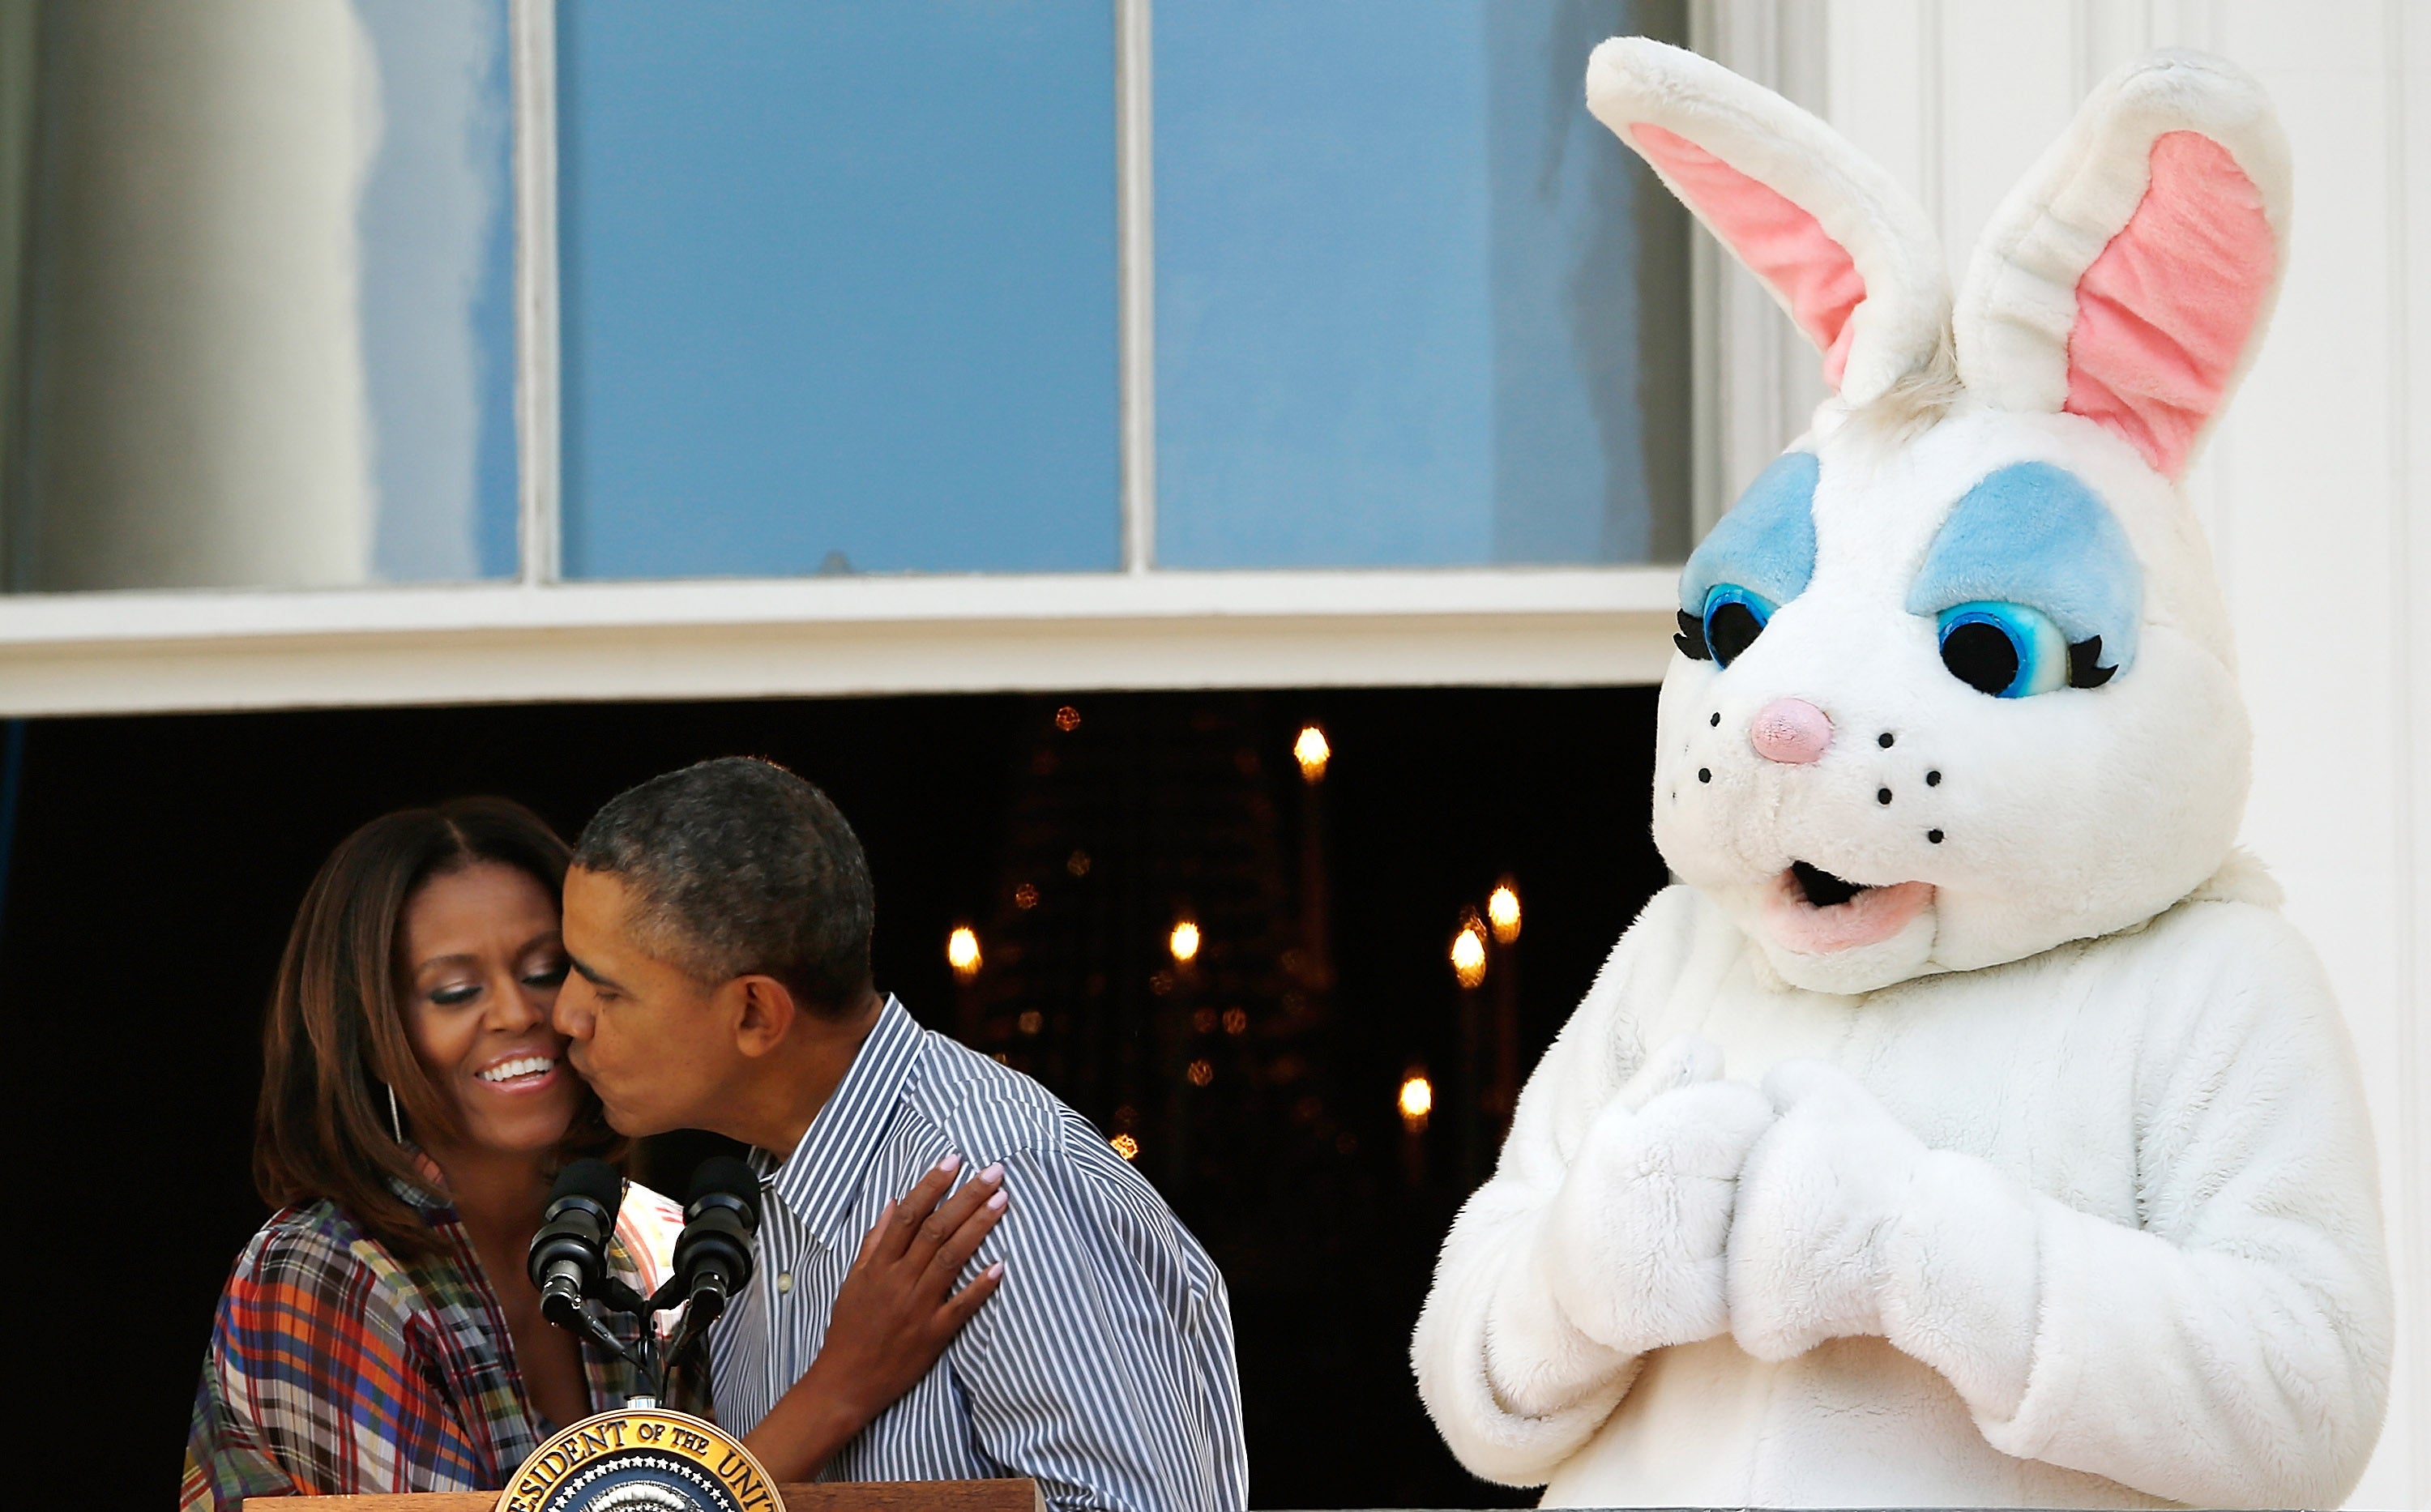 An Oh-So-Stylish Look Back At The Obamas On Easter Sunday
